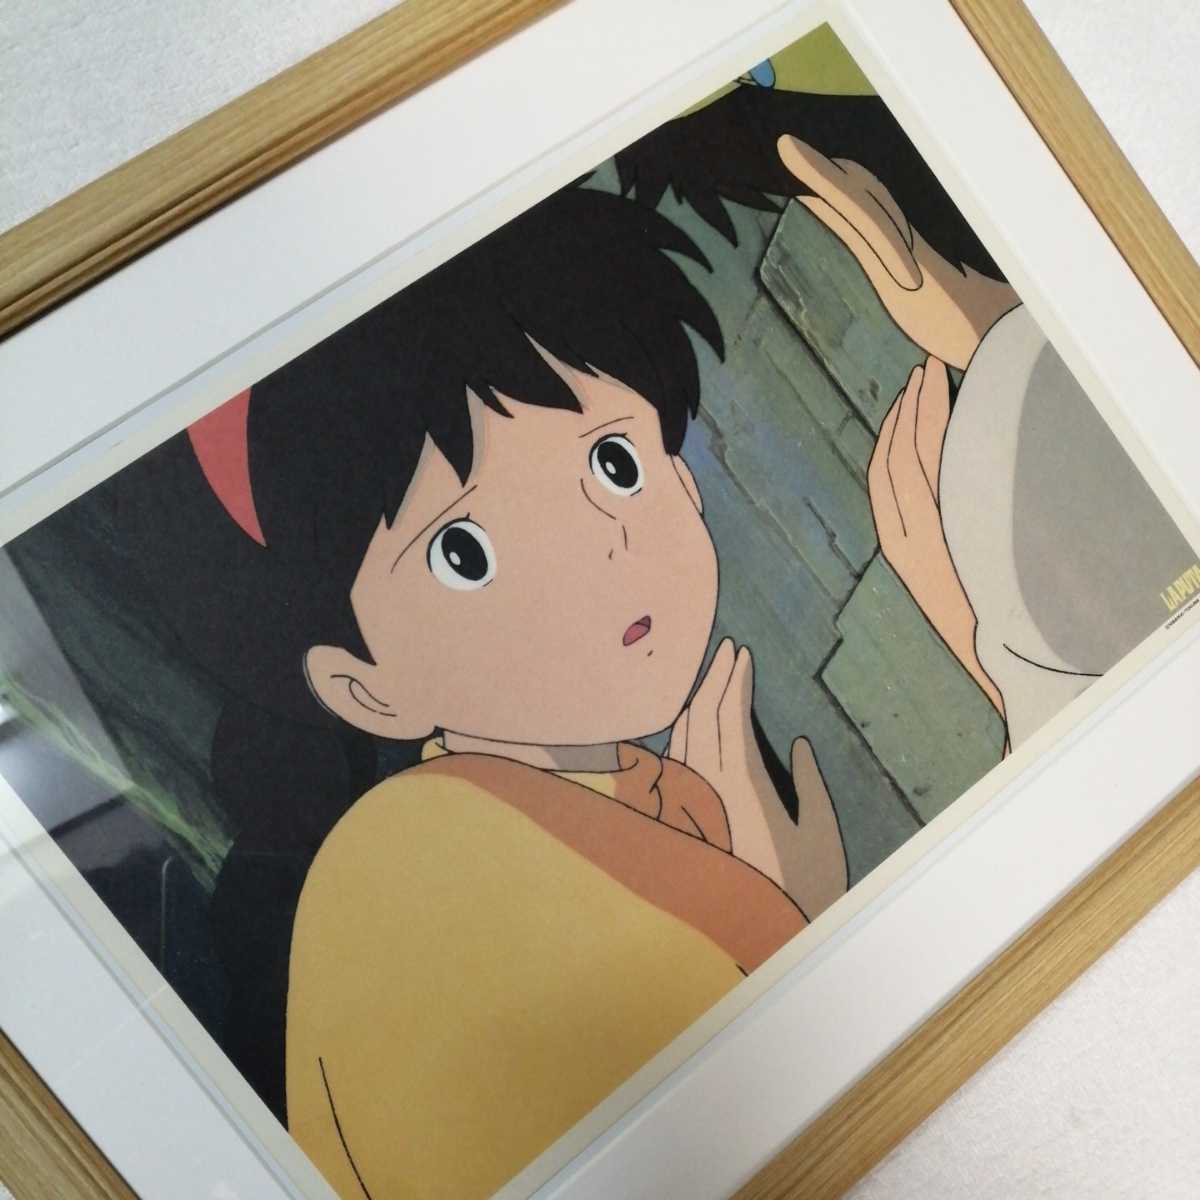 More than 30 years ago [At that time] Studio Ghibli Castle in the Sky [Framed item] Poster, wall hanging painting, reproduction original painting, inspection) cel painting, postcard, Hayao Miyazaki, comics, anime goods, others